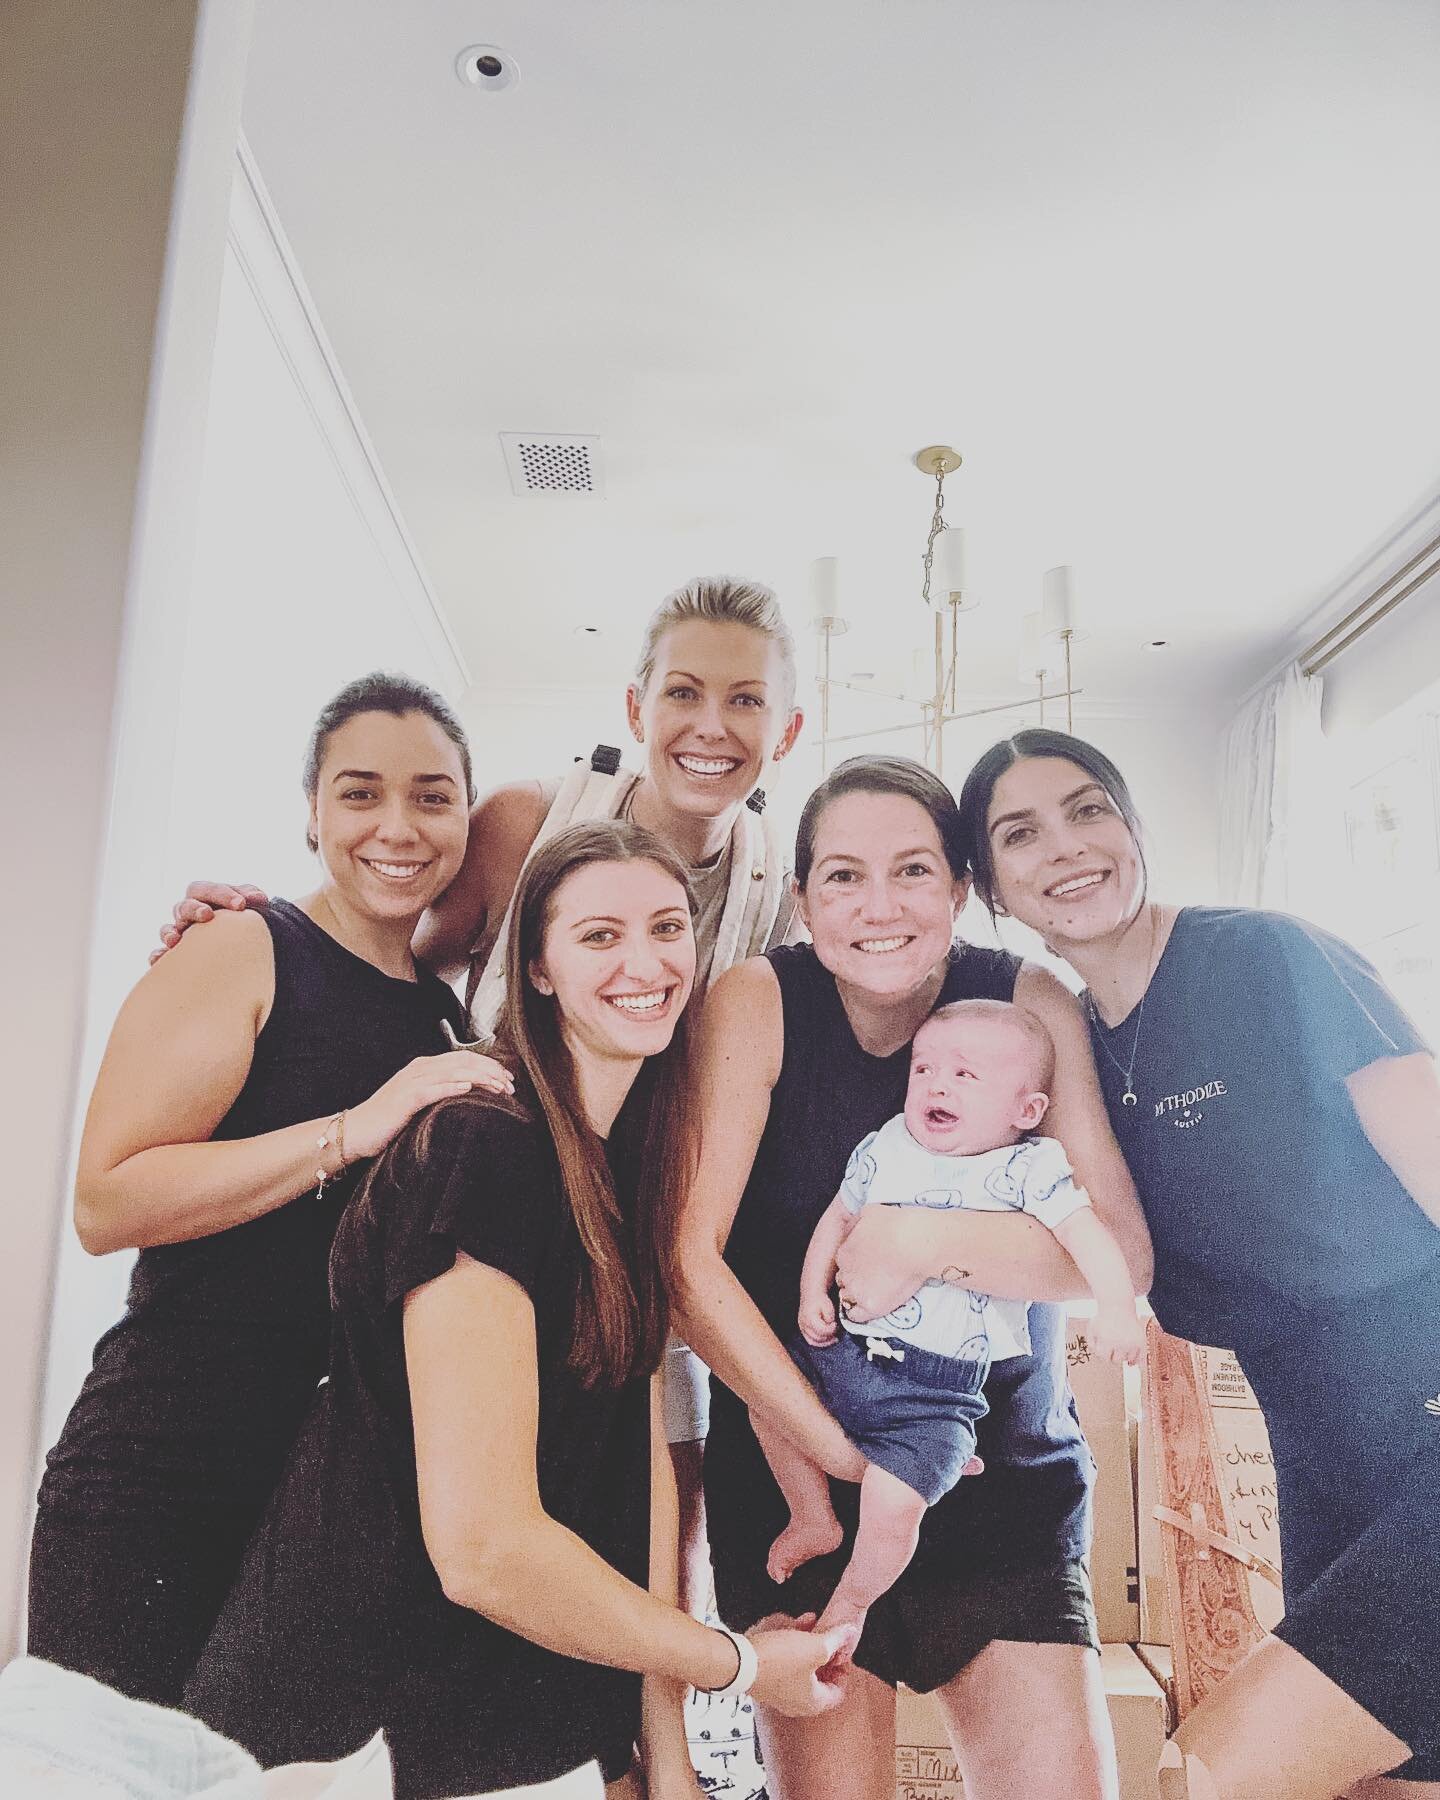 We had a tiny visitor pop into our project this weekend! This was an all hands on deck day with almost our full team showing up to knock out a mega move-in. Grateful for this team and the clients we get to serve! 
.
.
.

#professionalorganizing #home